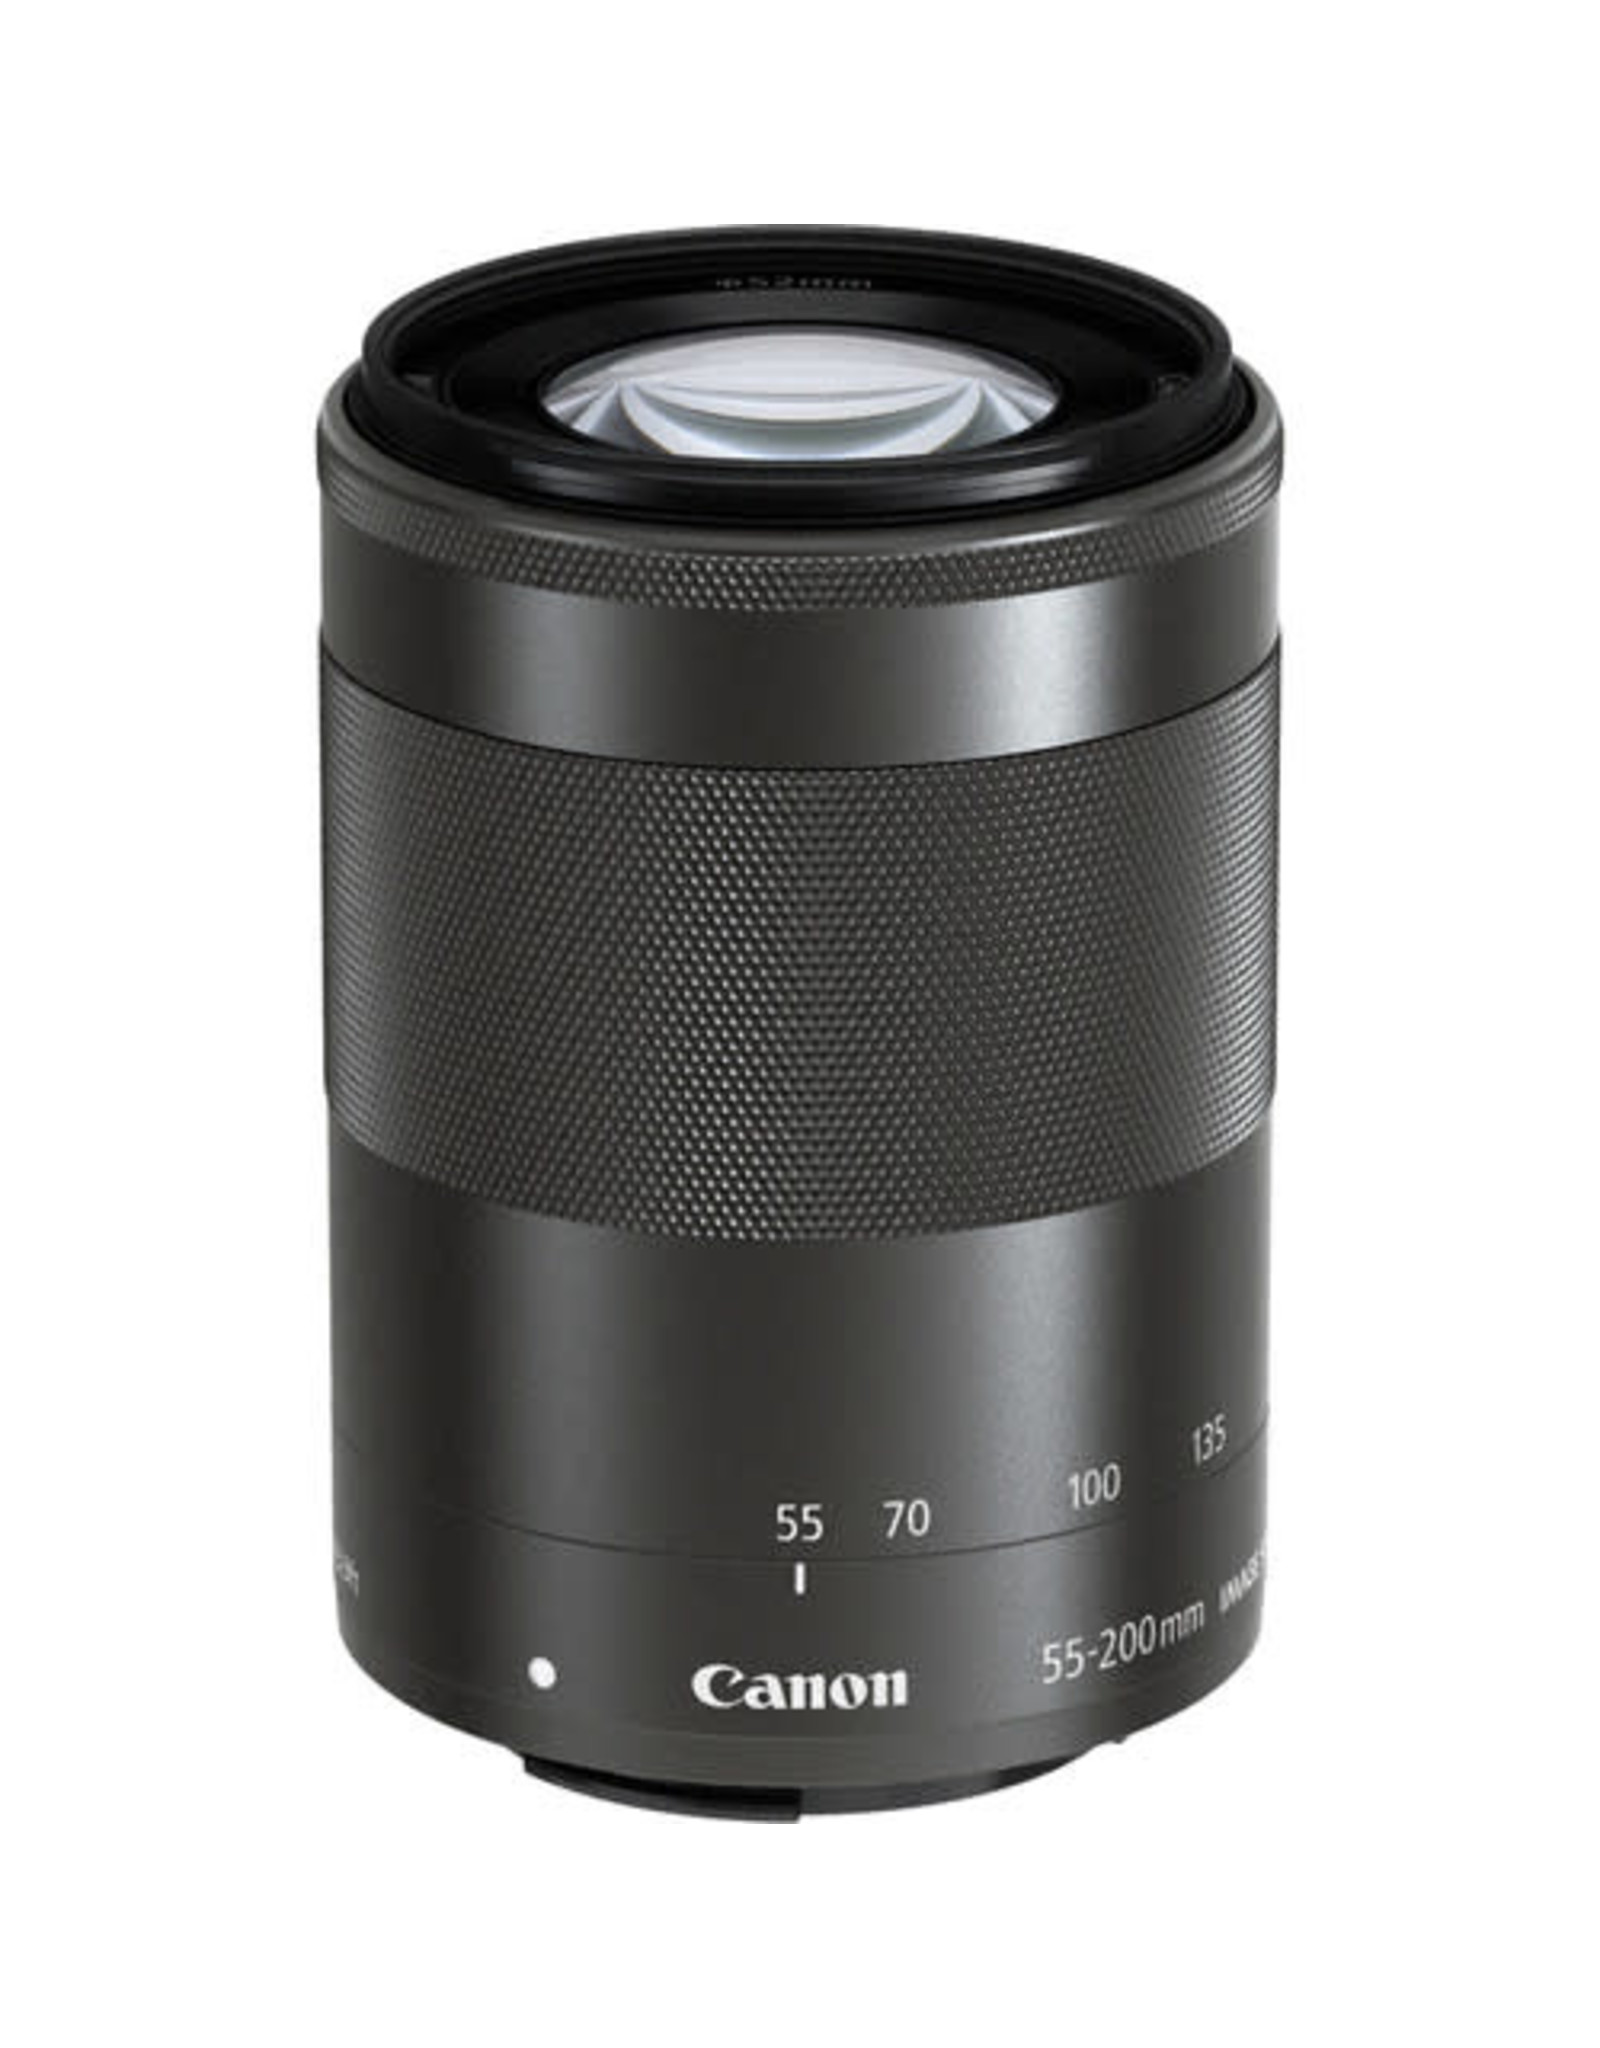 Canon EF-M 55-200mm f/4.5-6.3 IS STM Lens (Black) (Mirrorless)